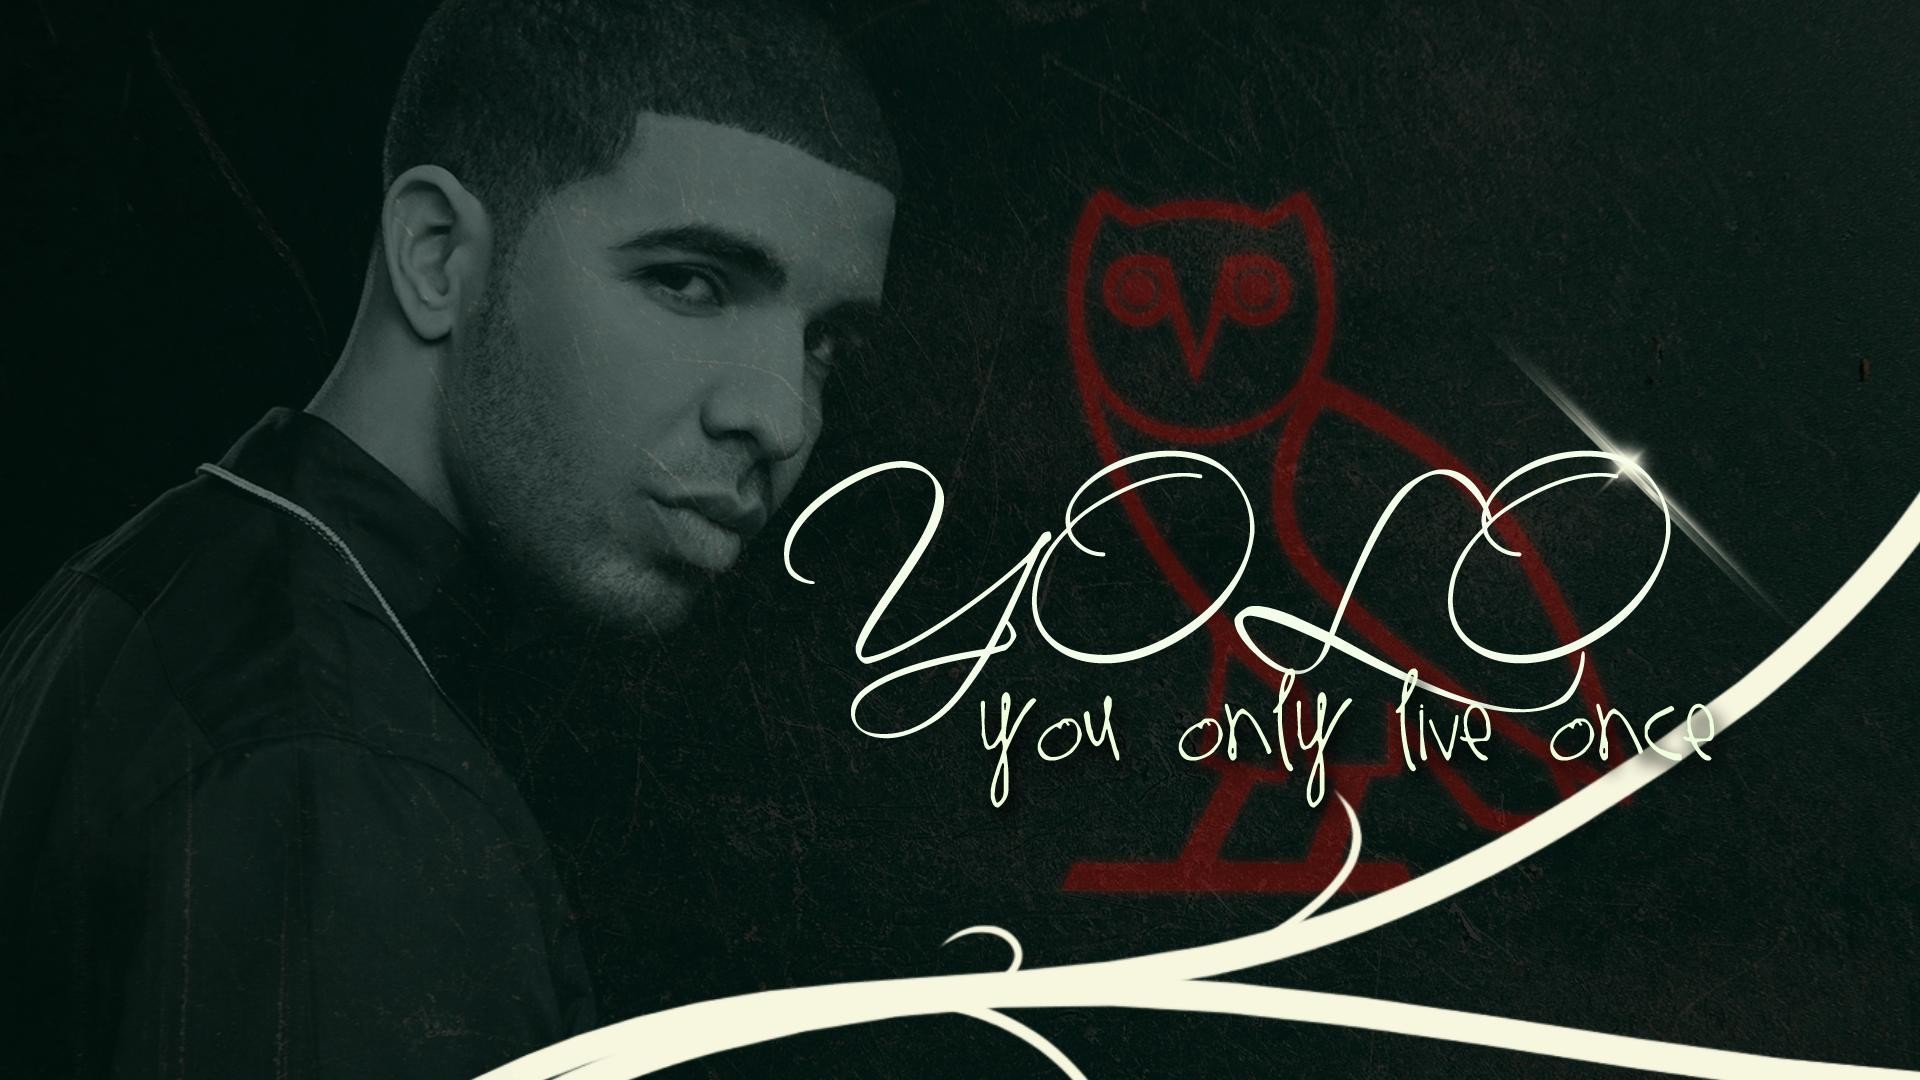 1920x1080 Drake Quote Wallpaper Wide On Wallpaper Hd 1920 x 1080 px 623.08 KB iphone  rapper waterfowl